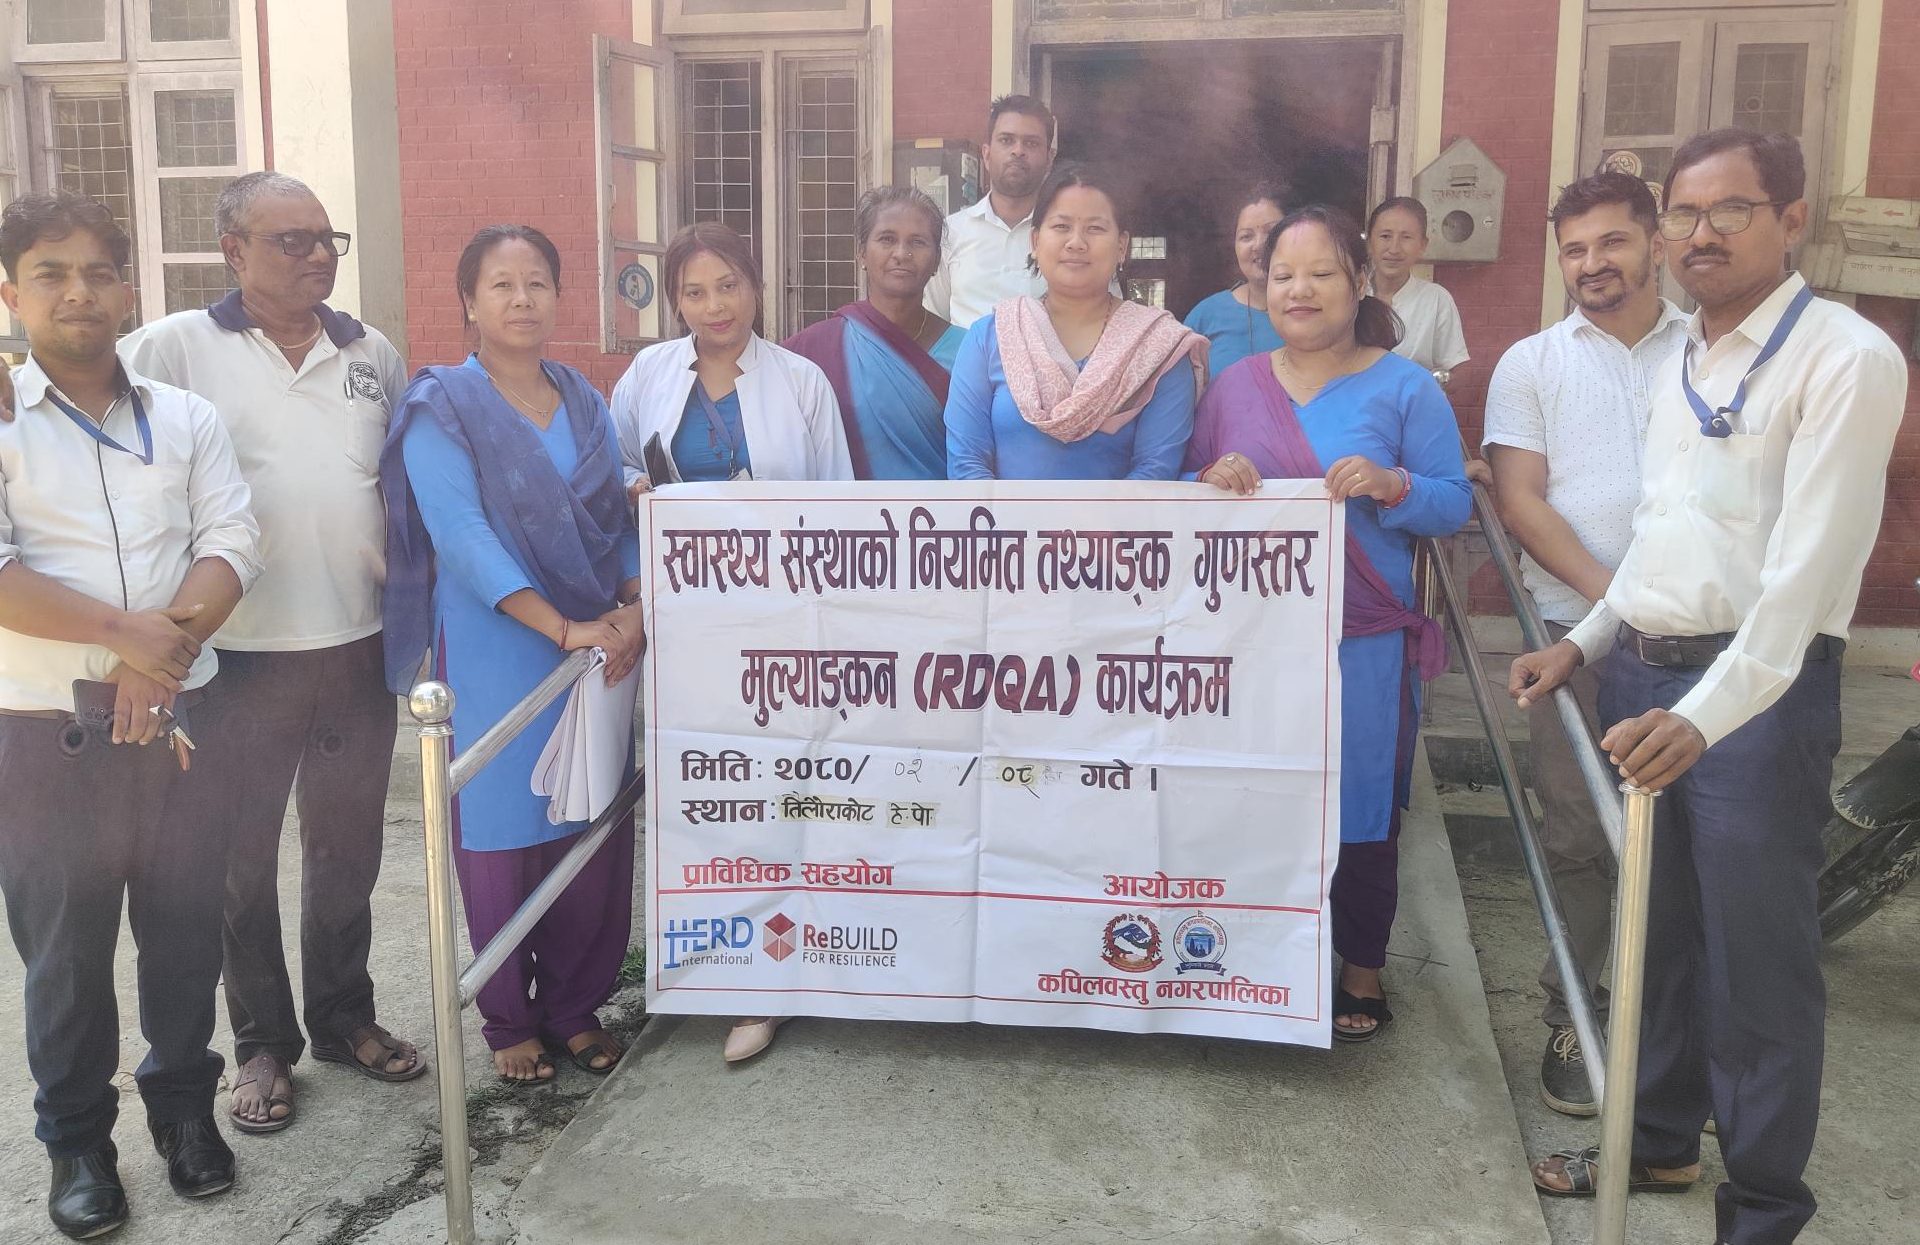 A group of health workers holding a sign outside a health facility